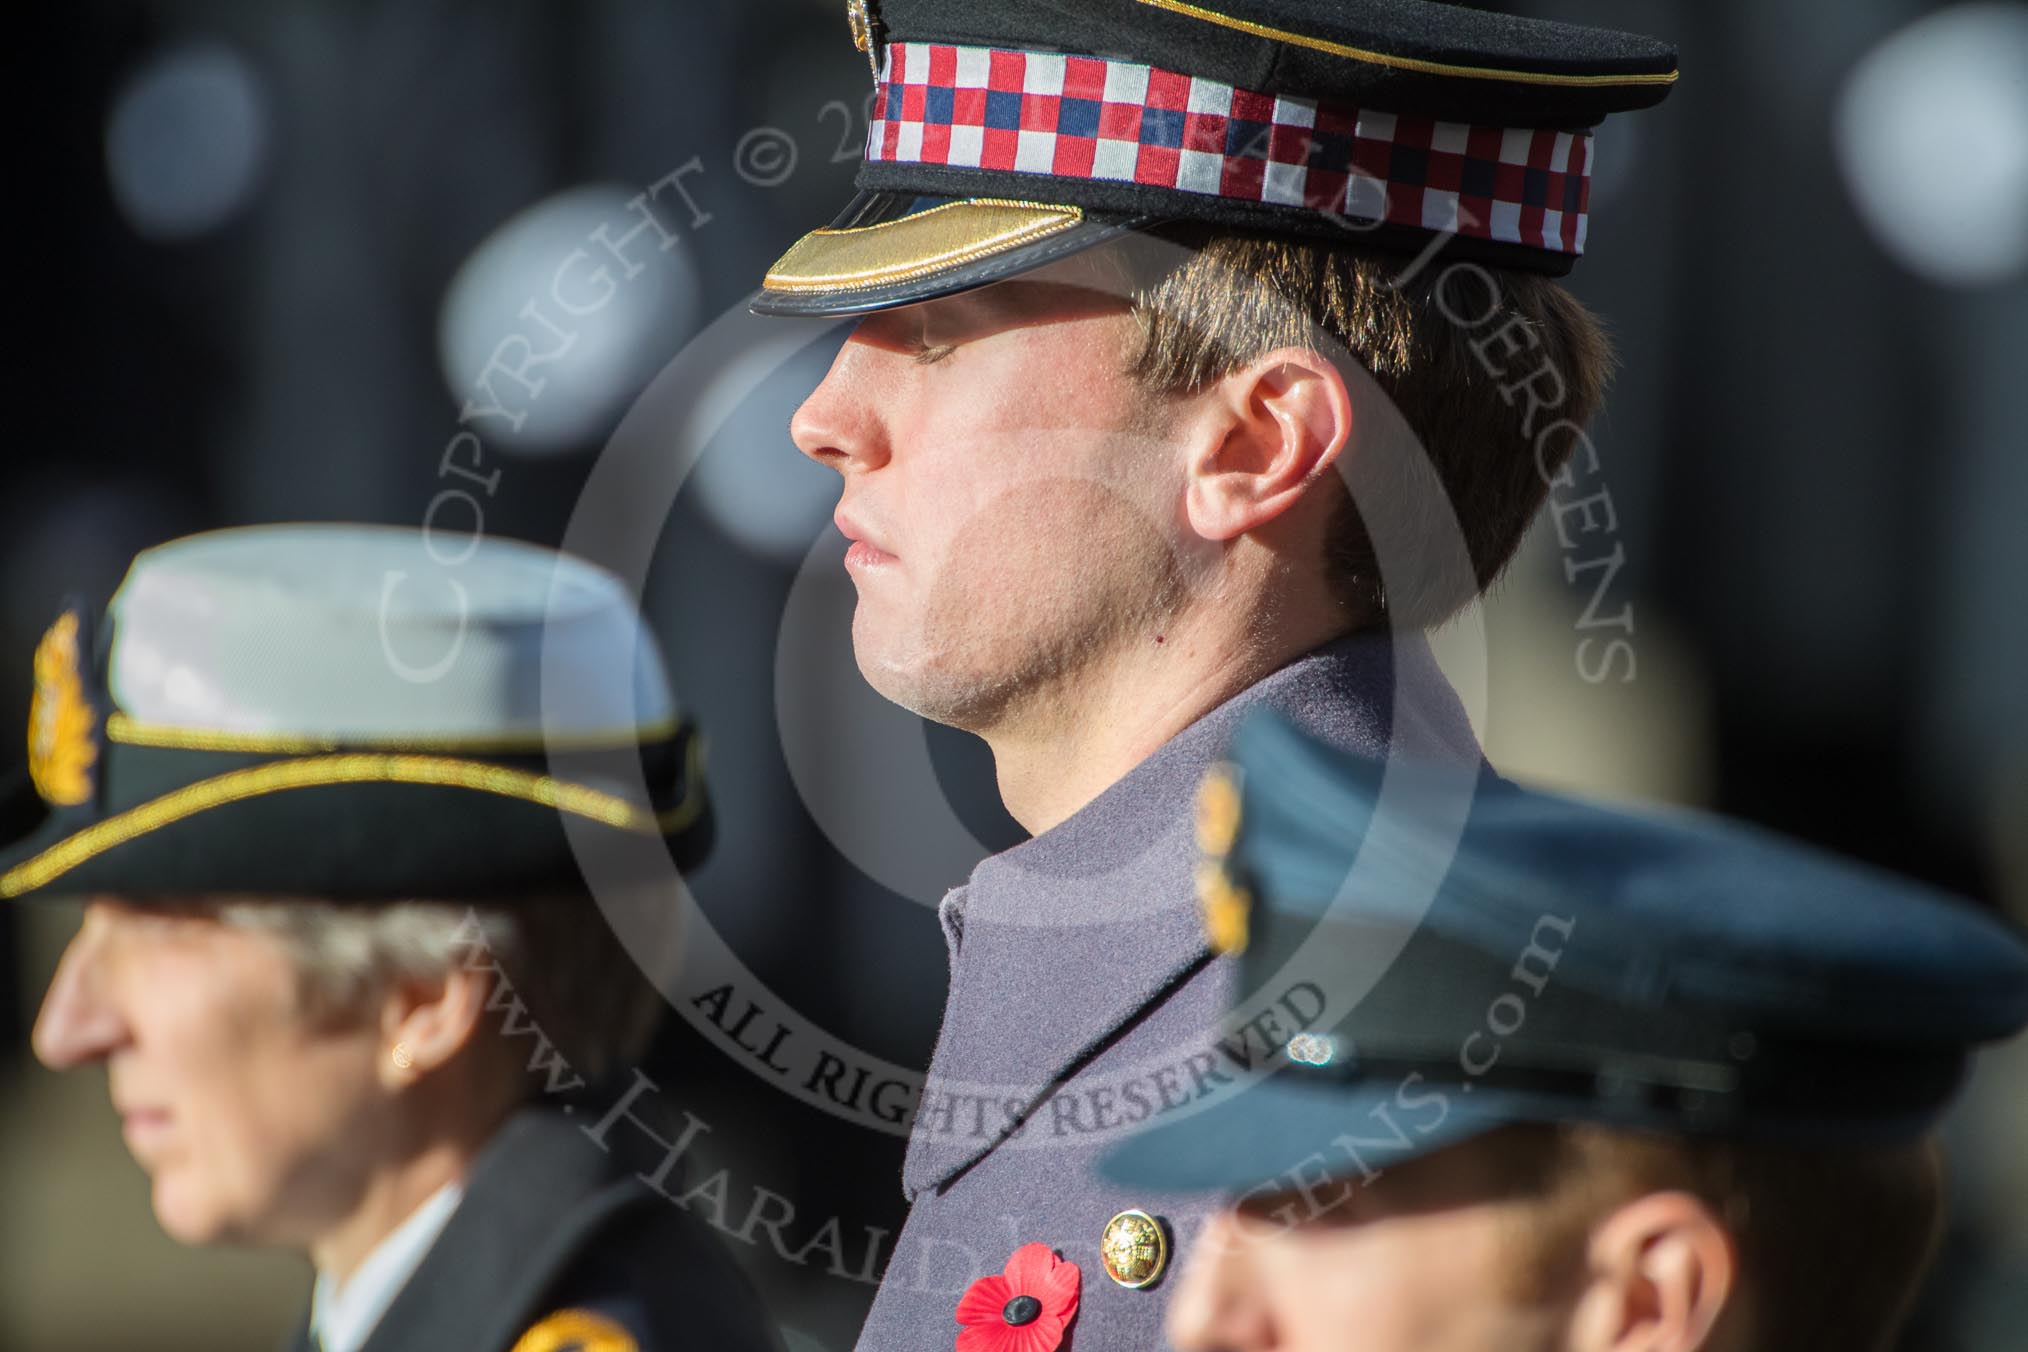 ??? during Remembrance Sunday Cenotaph Ceremony 2018 at Horse Guards Parade, Westminster, London, 11 November 2018, 11:03.